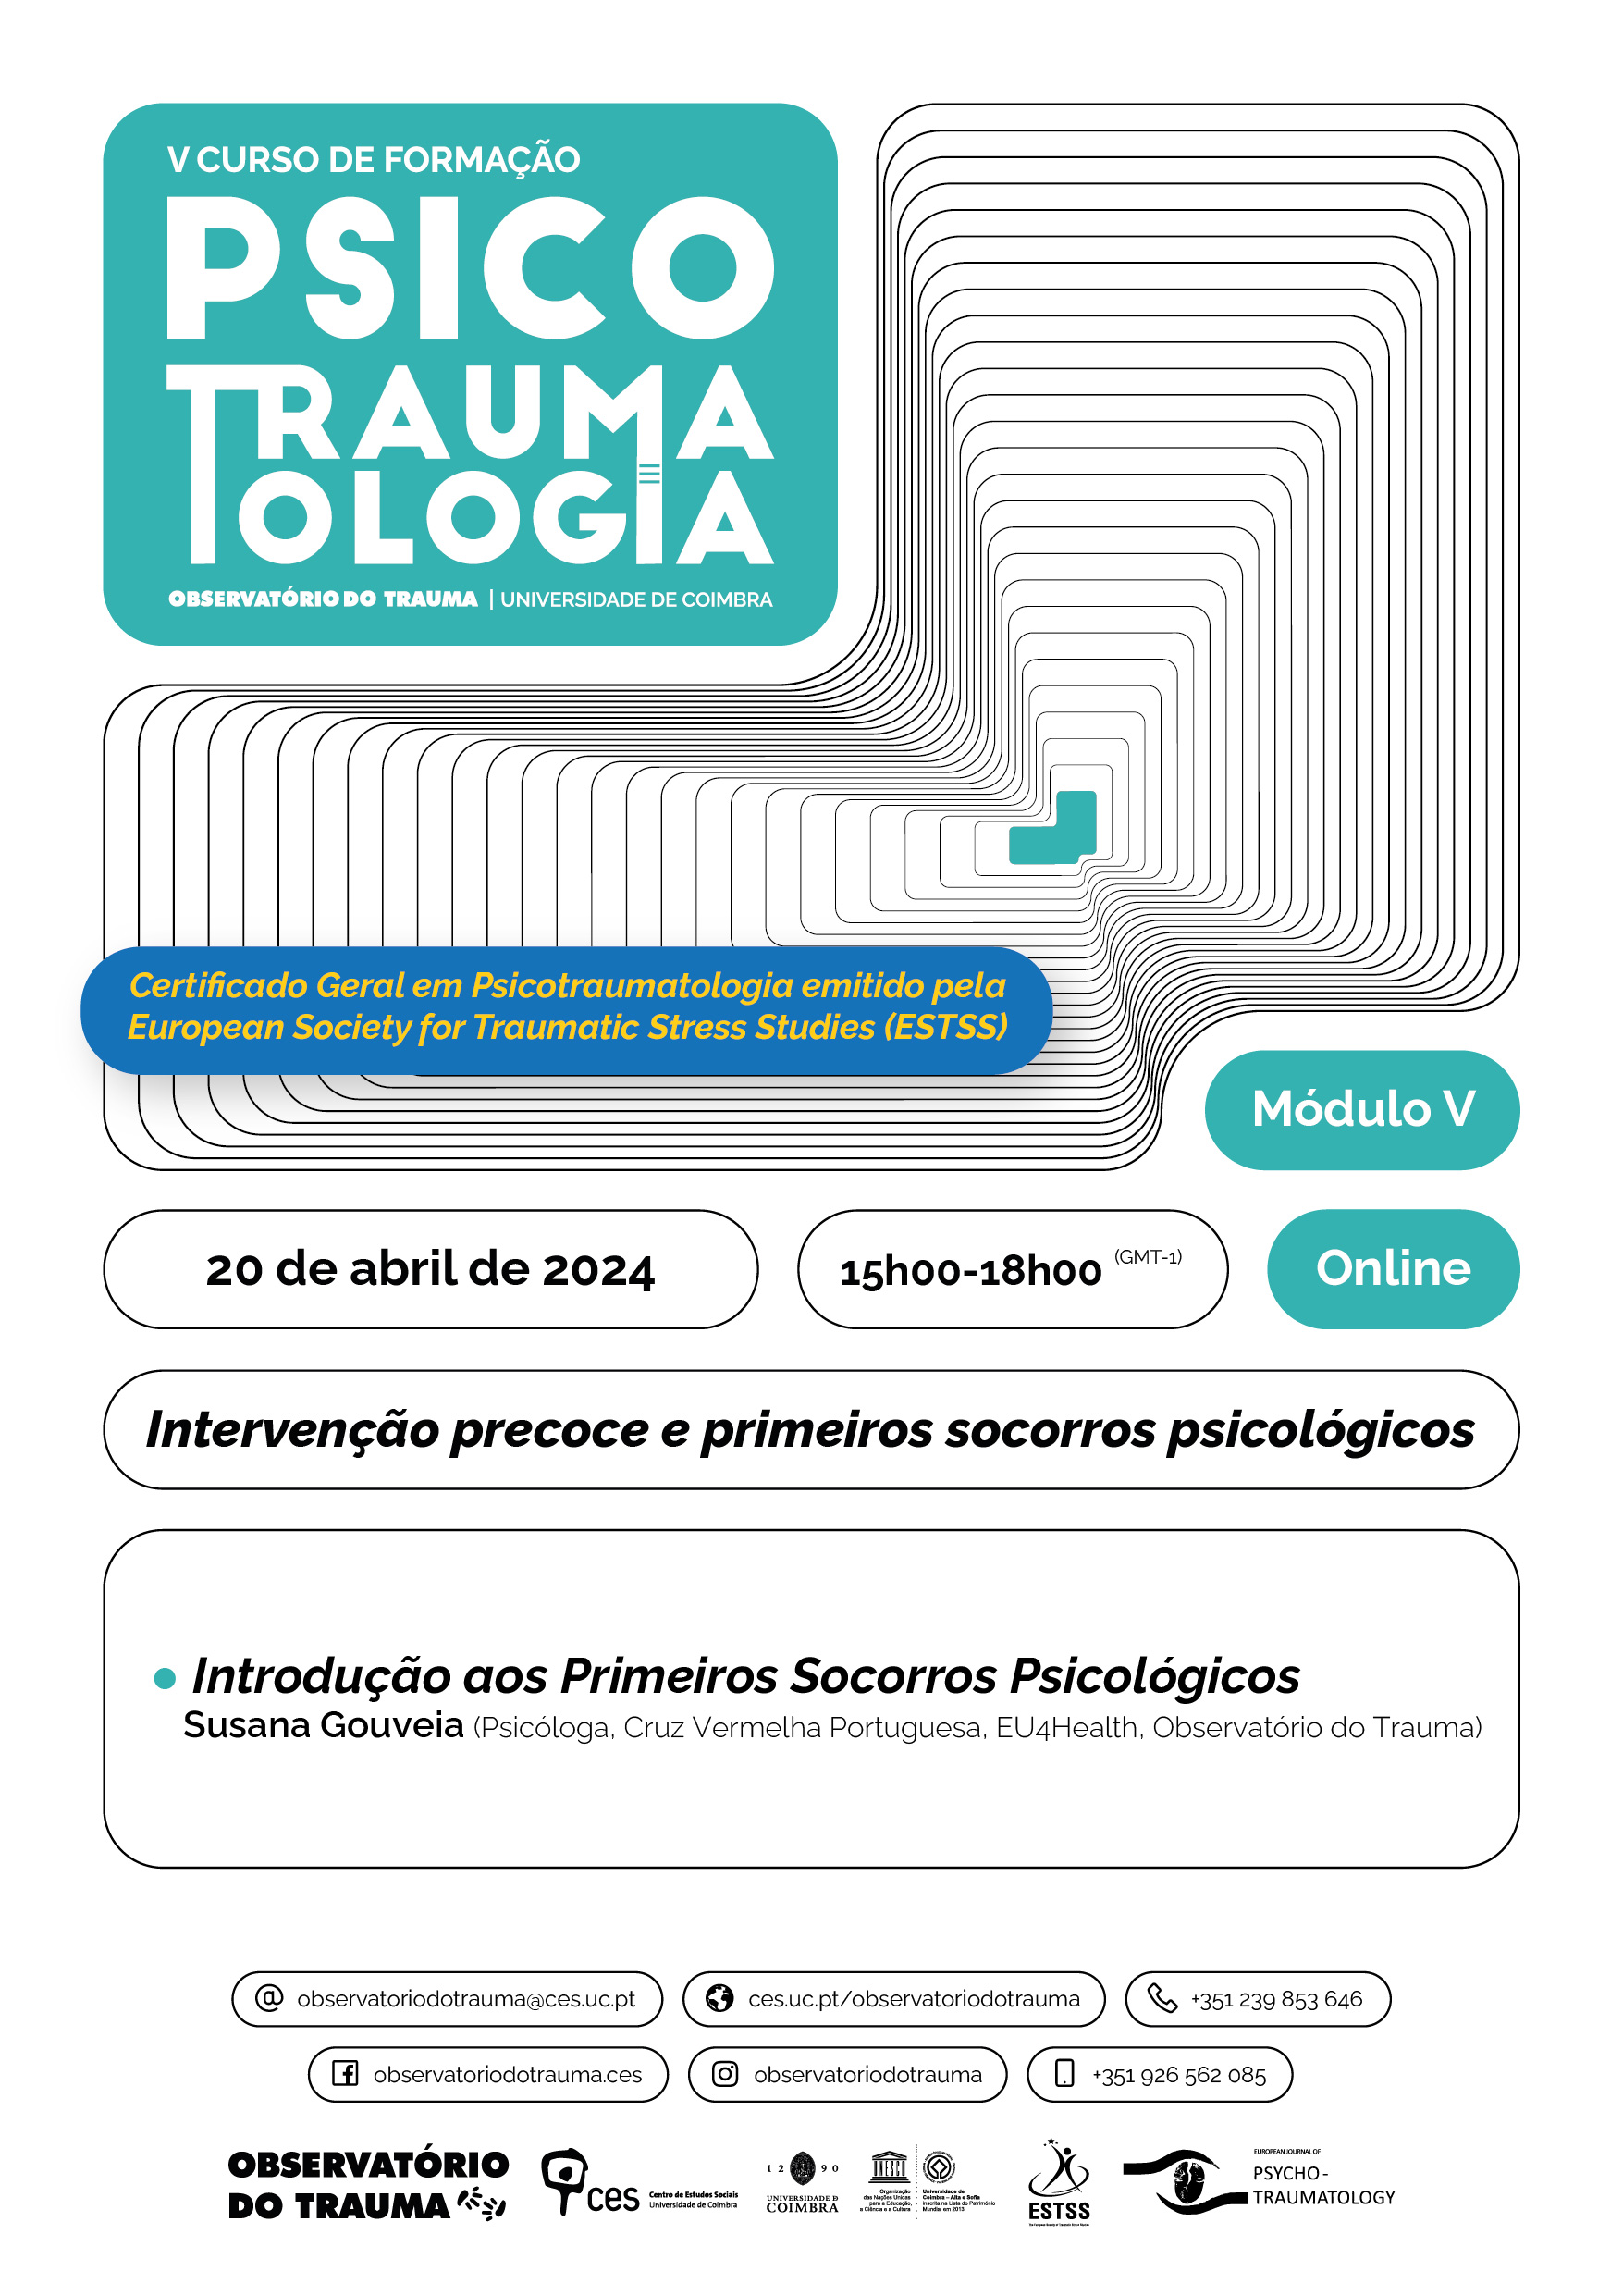 Module V: Early intervention and psychological first aid <span id="edit_45684"><script>$(function() { $('#edit_45684').load( "/myces/user/editobj.php?tipo=evento&id=45684" ); });</script></span>